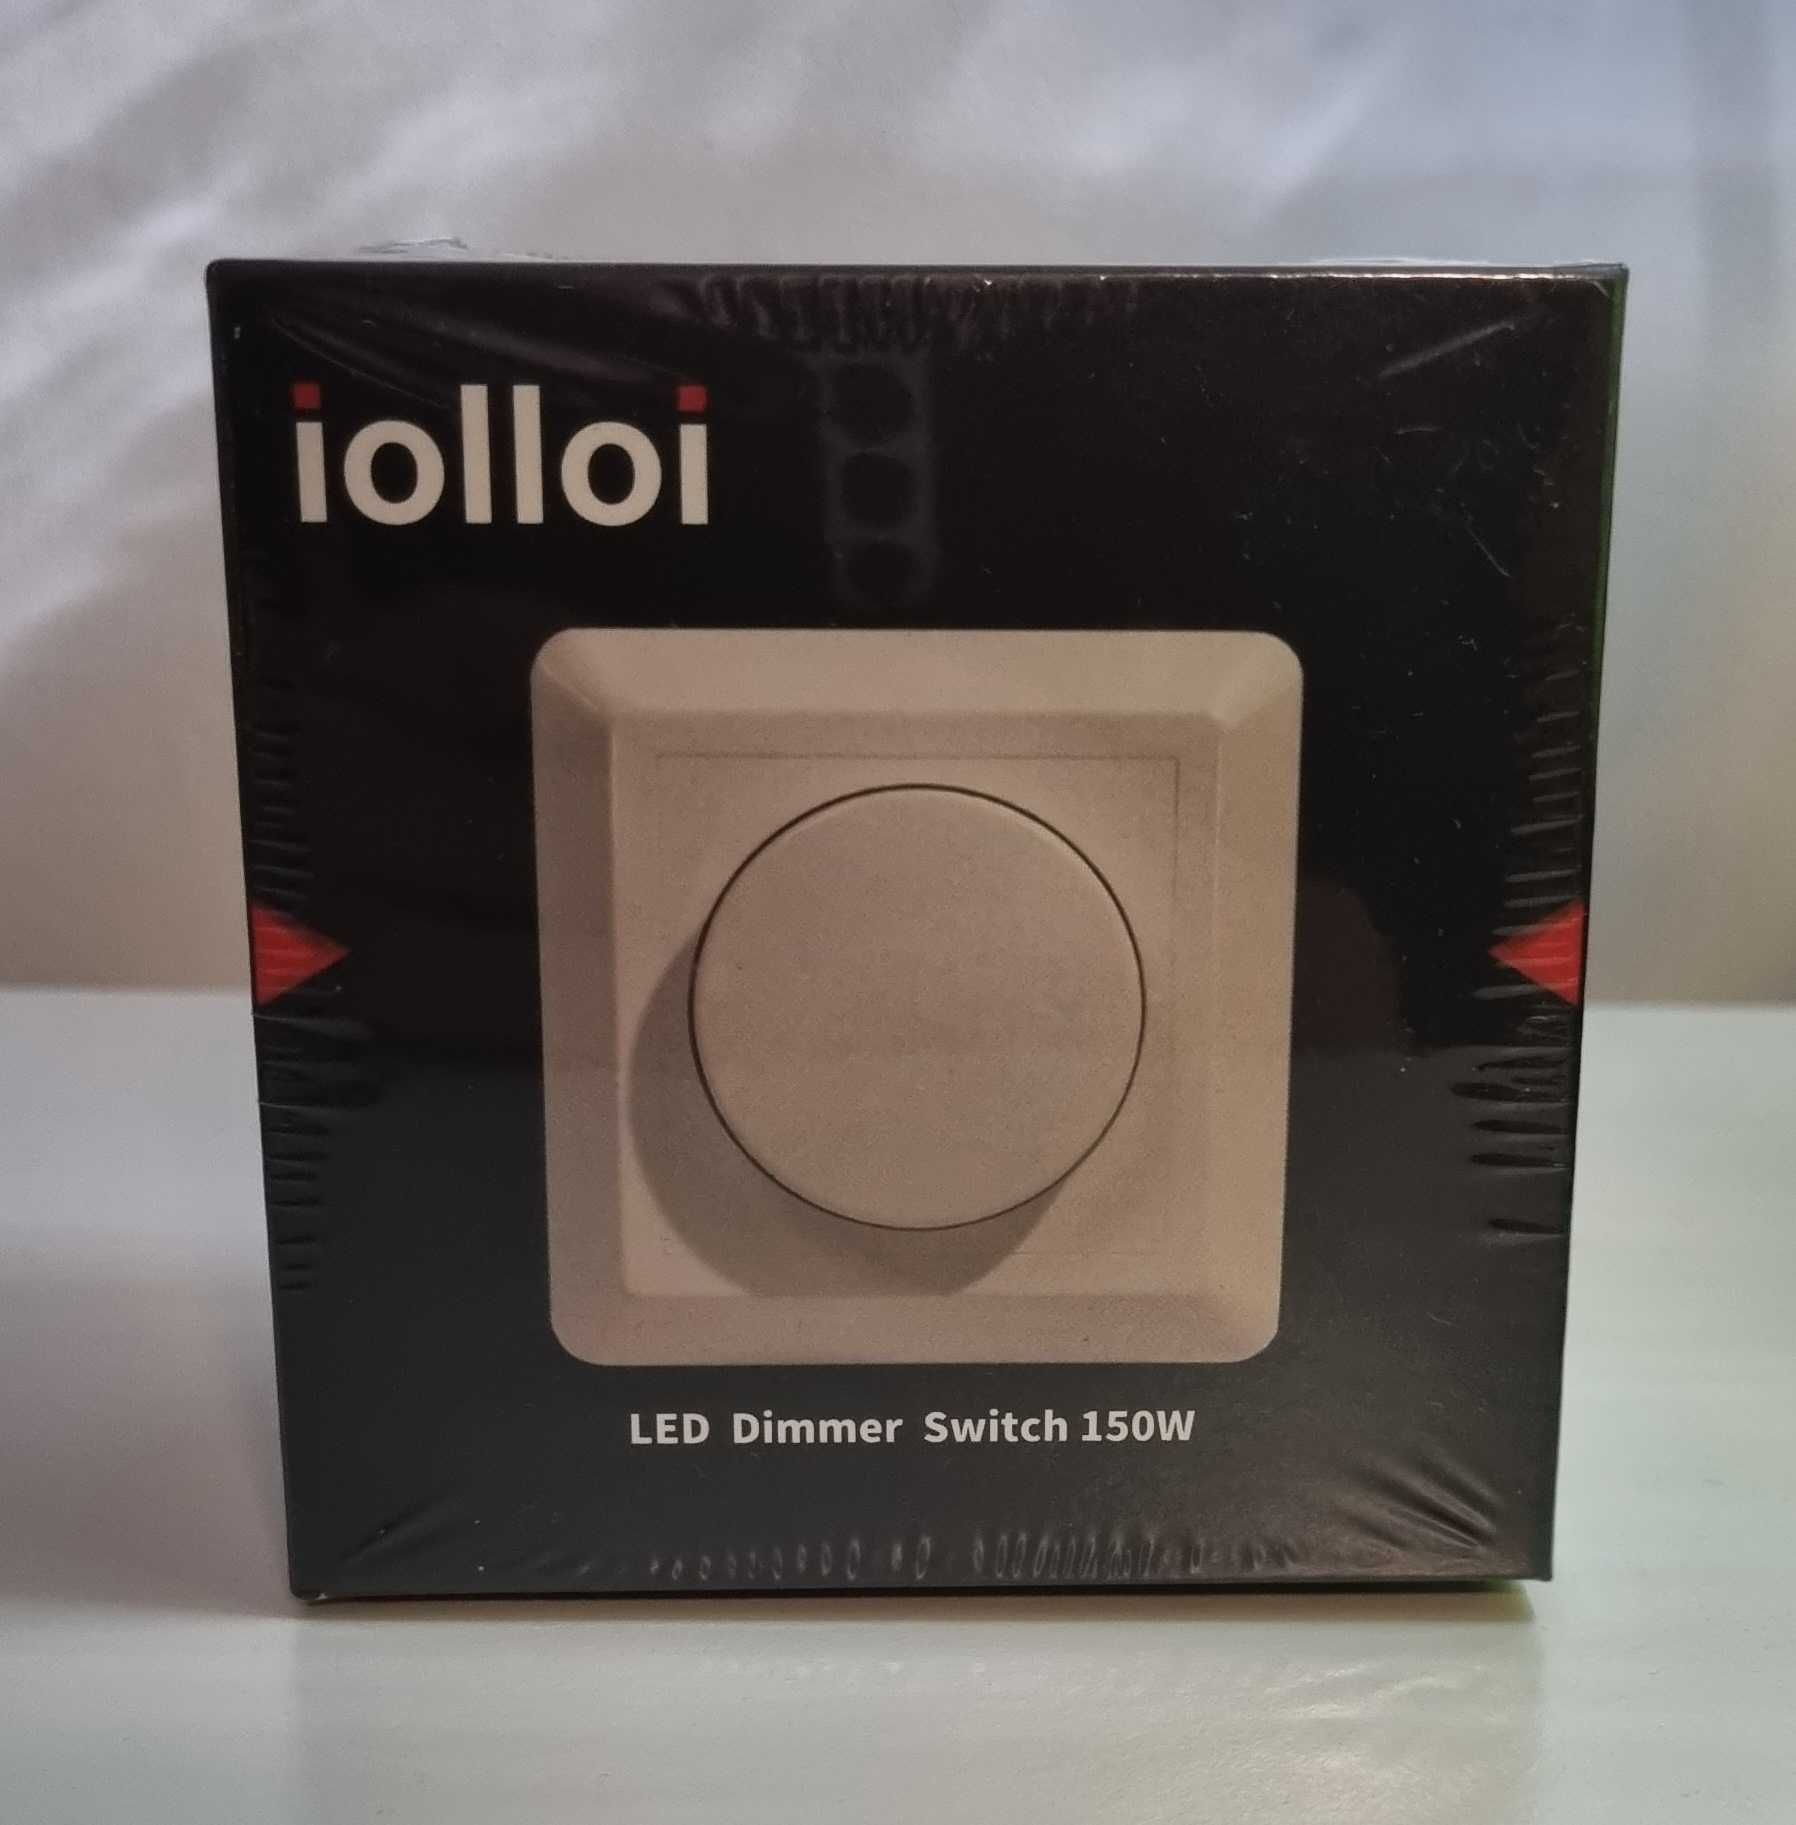 iolloi led dimmer switch 150